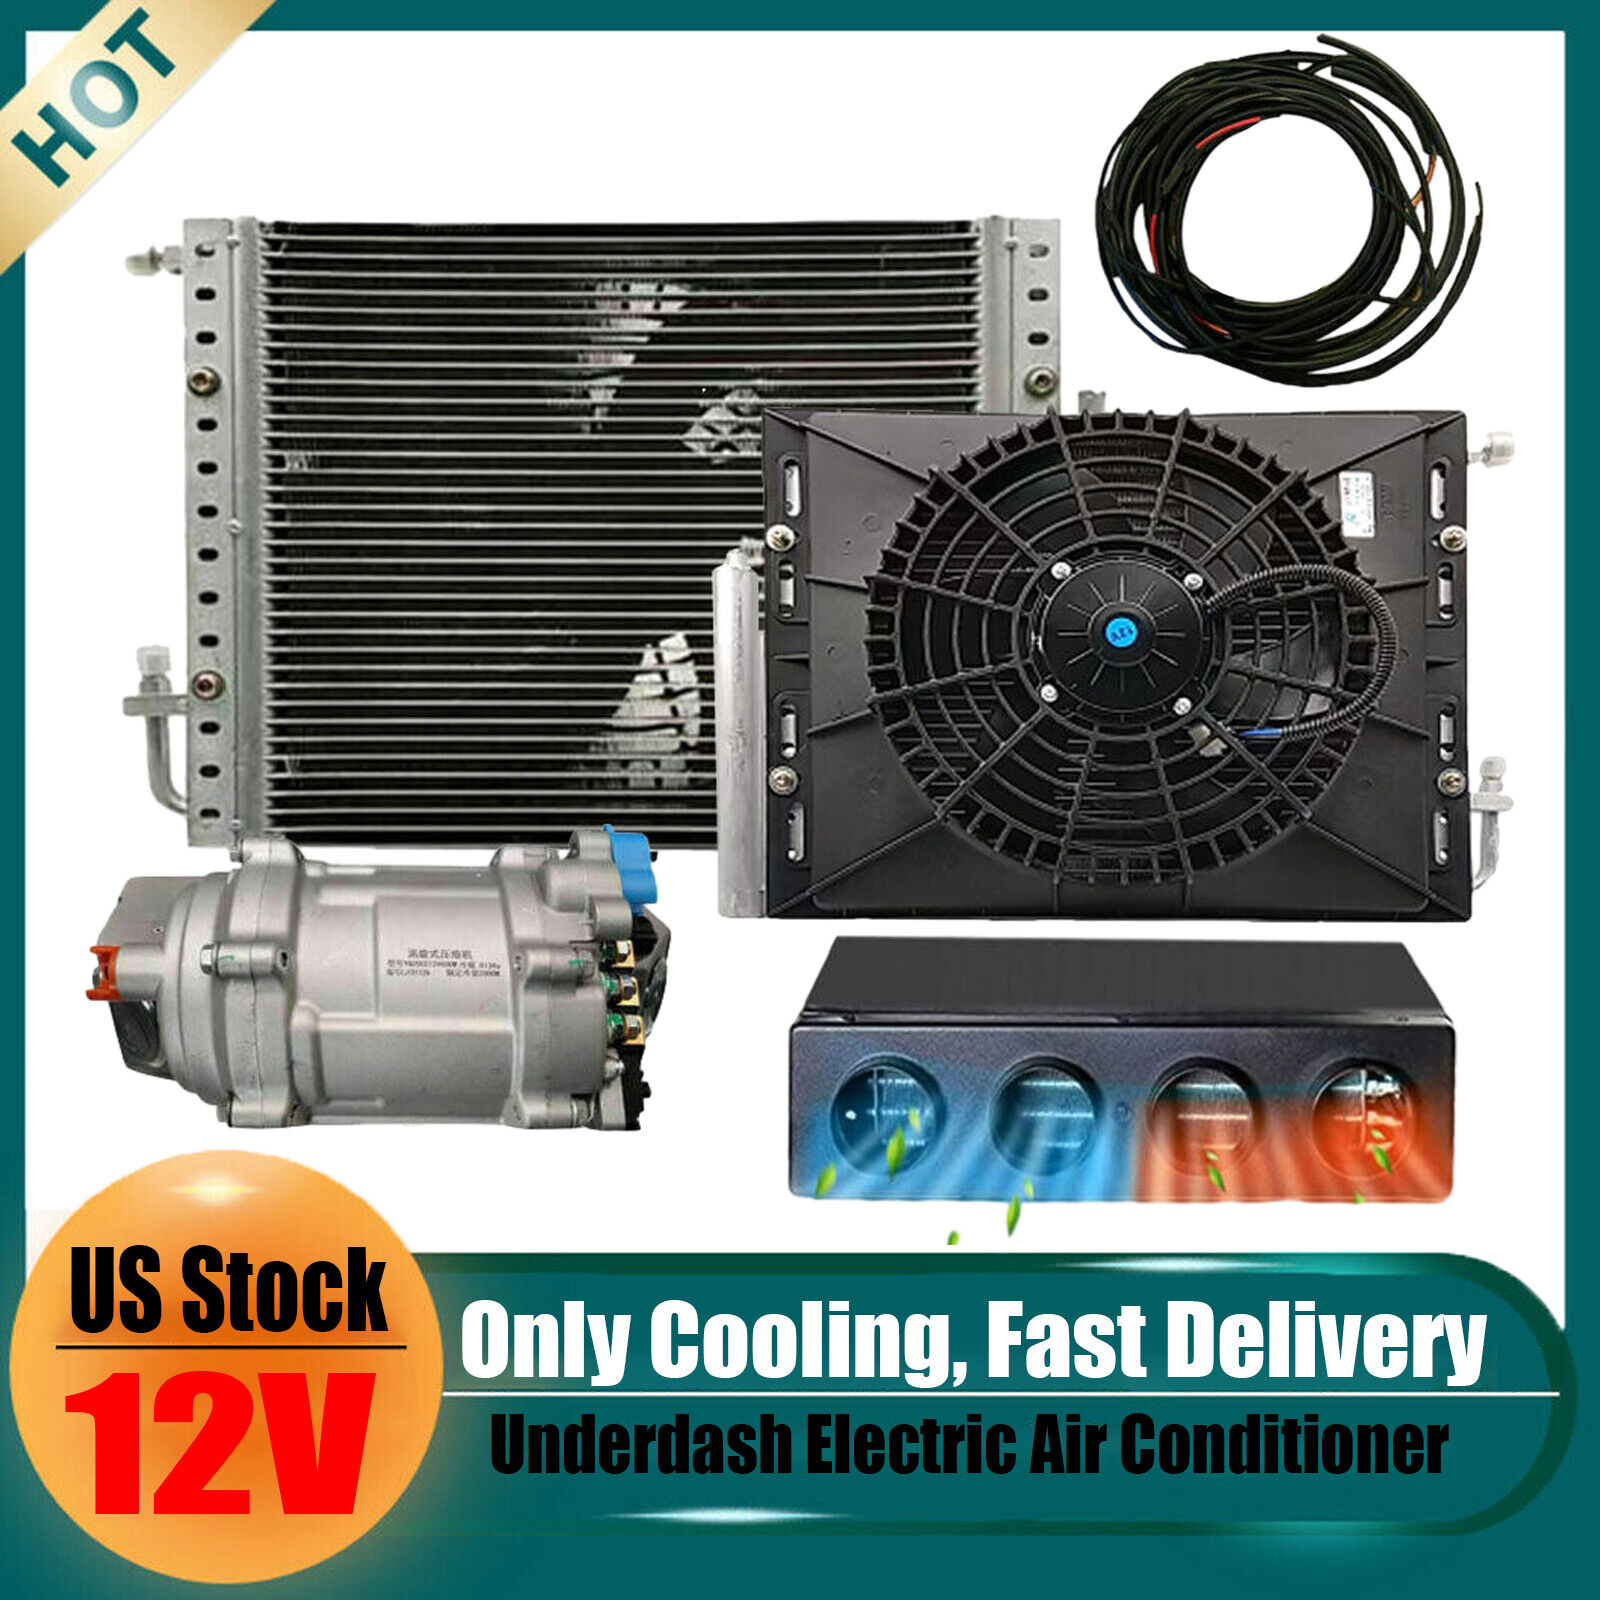 Universal Electric Underdash Air Conditioning 12V Only Cool A/C Kit Auto Car DC